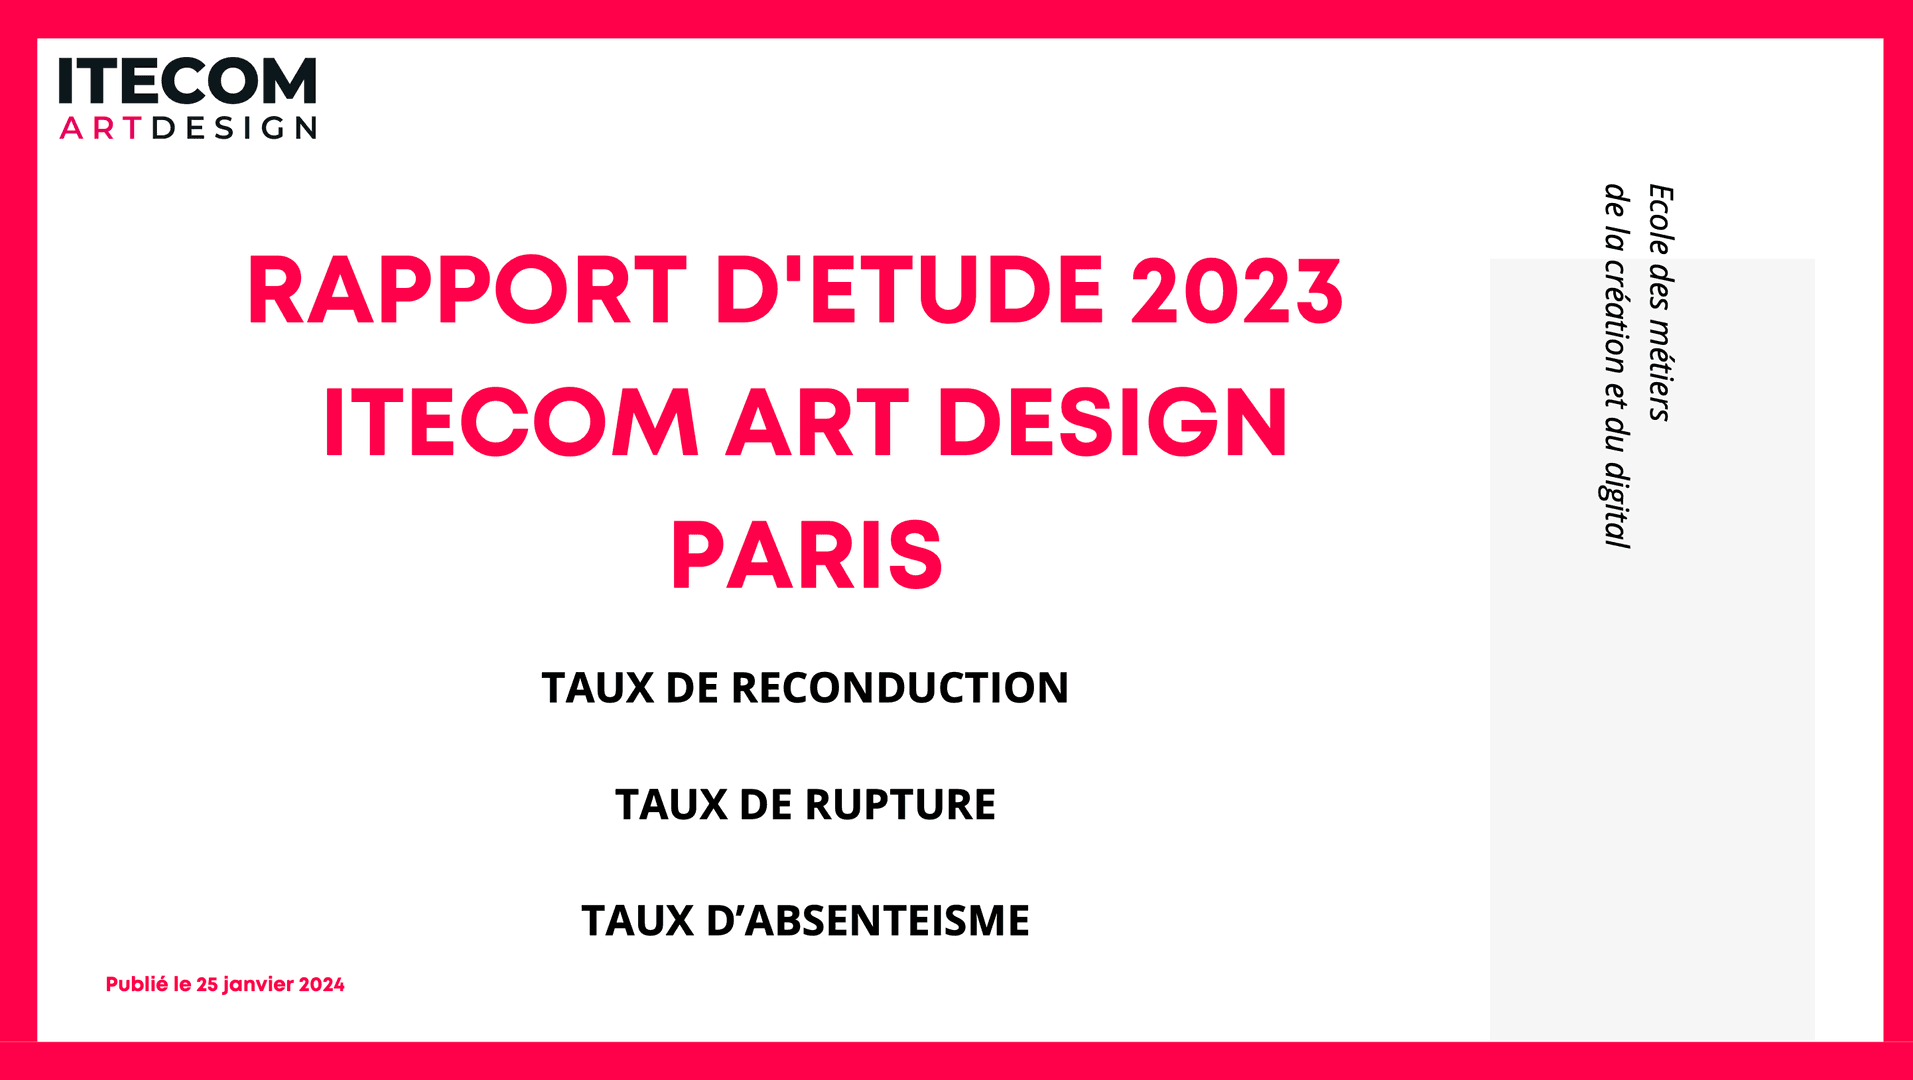 2022-2023-taux-absenteisme-rupture-reconduction.png